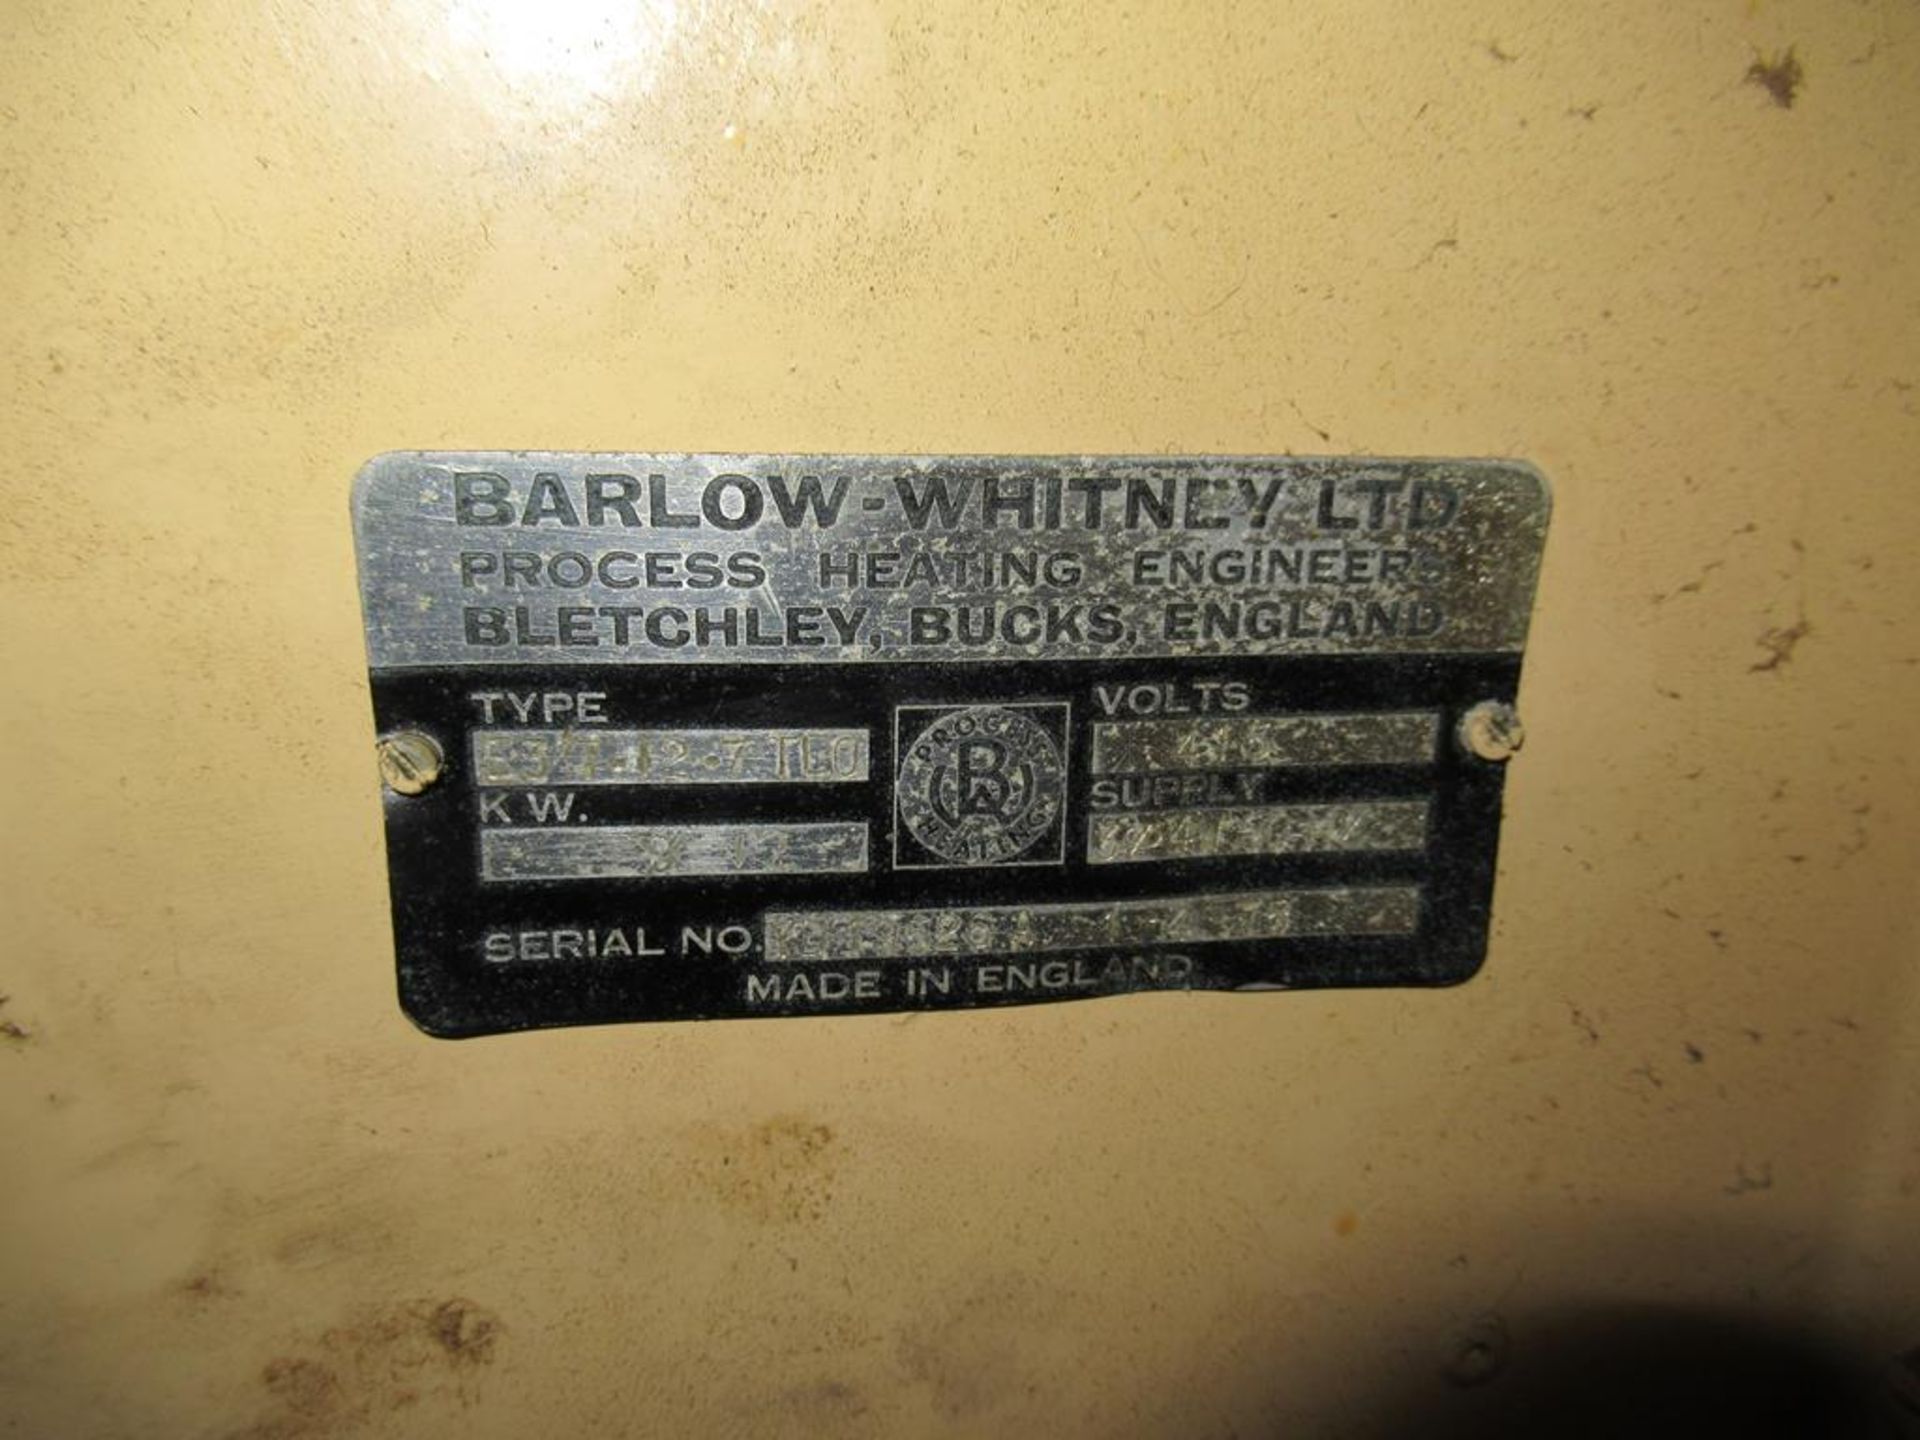 1x Barlow- Whitney LTD E37-12-7 TLO Temp Controlled Electric Batch Oven - Image 3 of 7